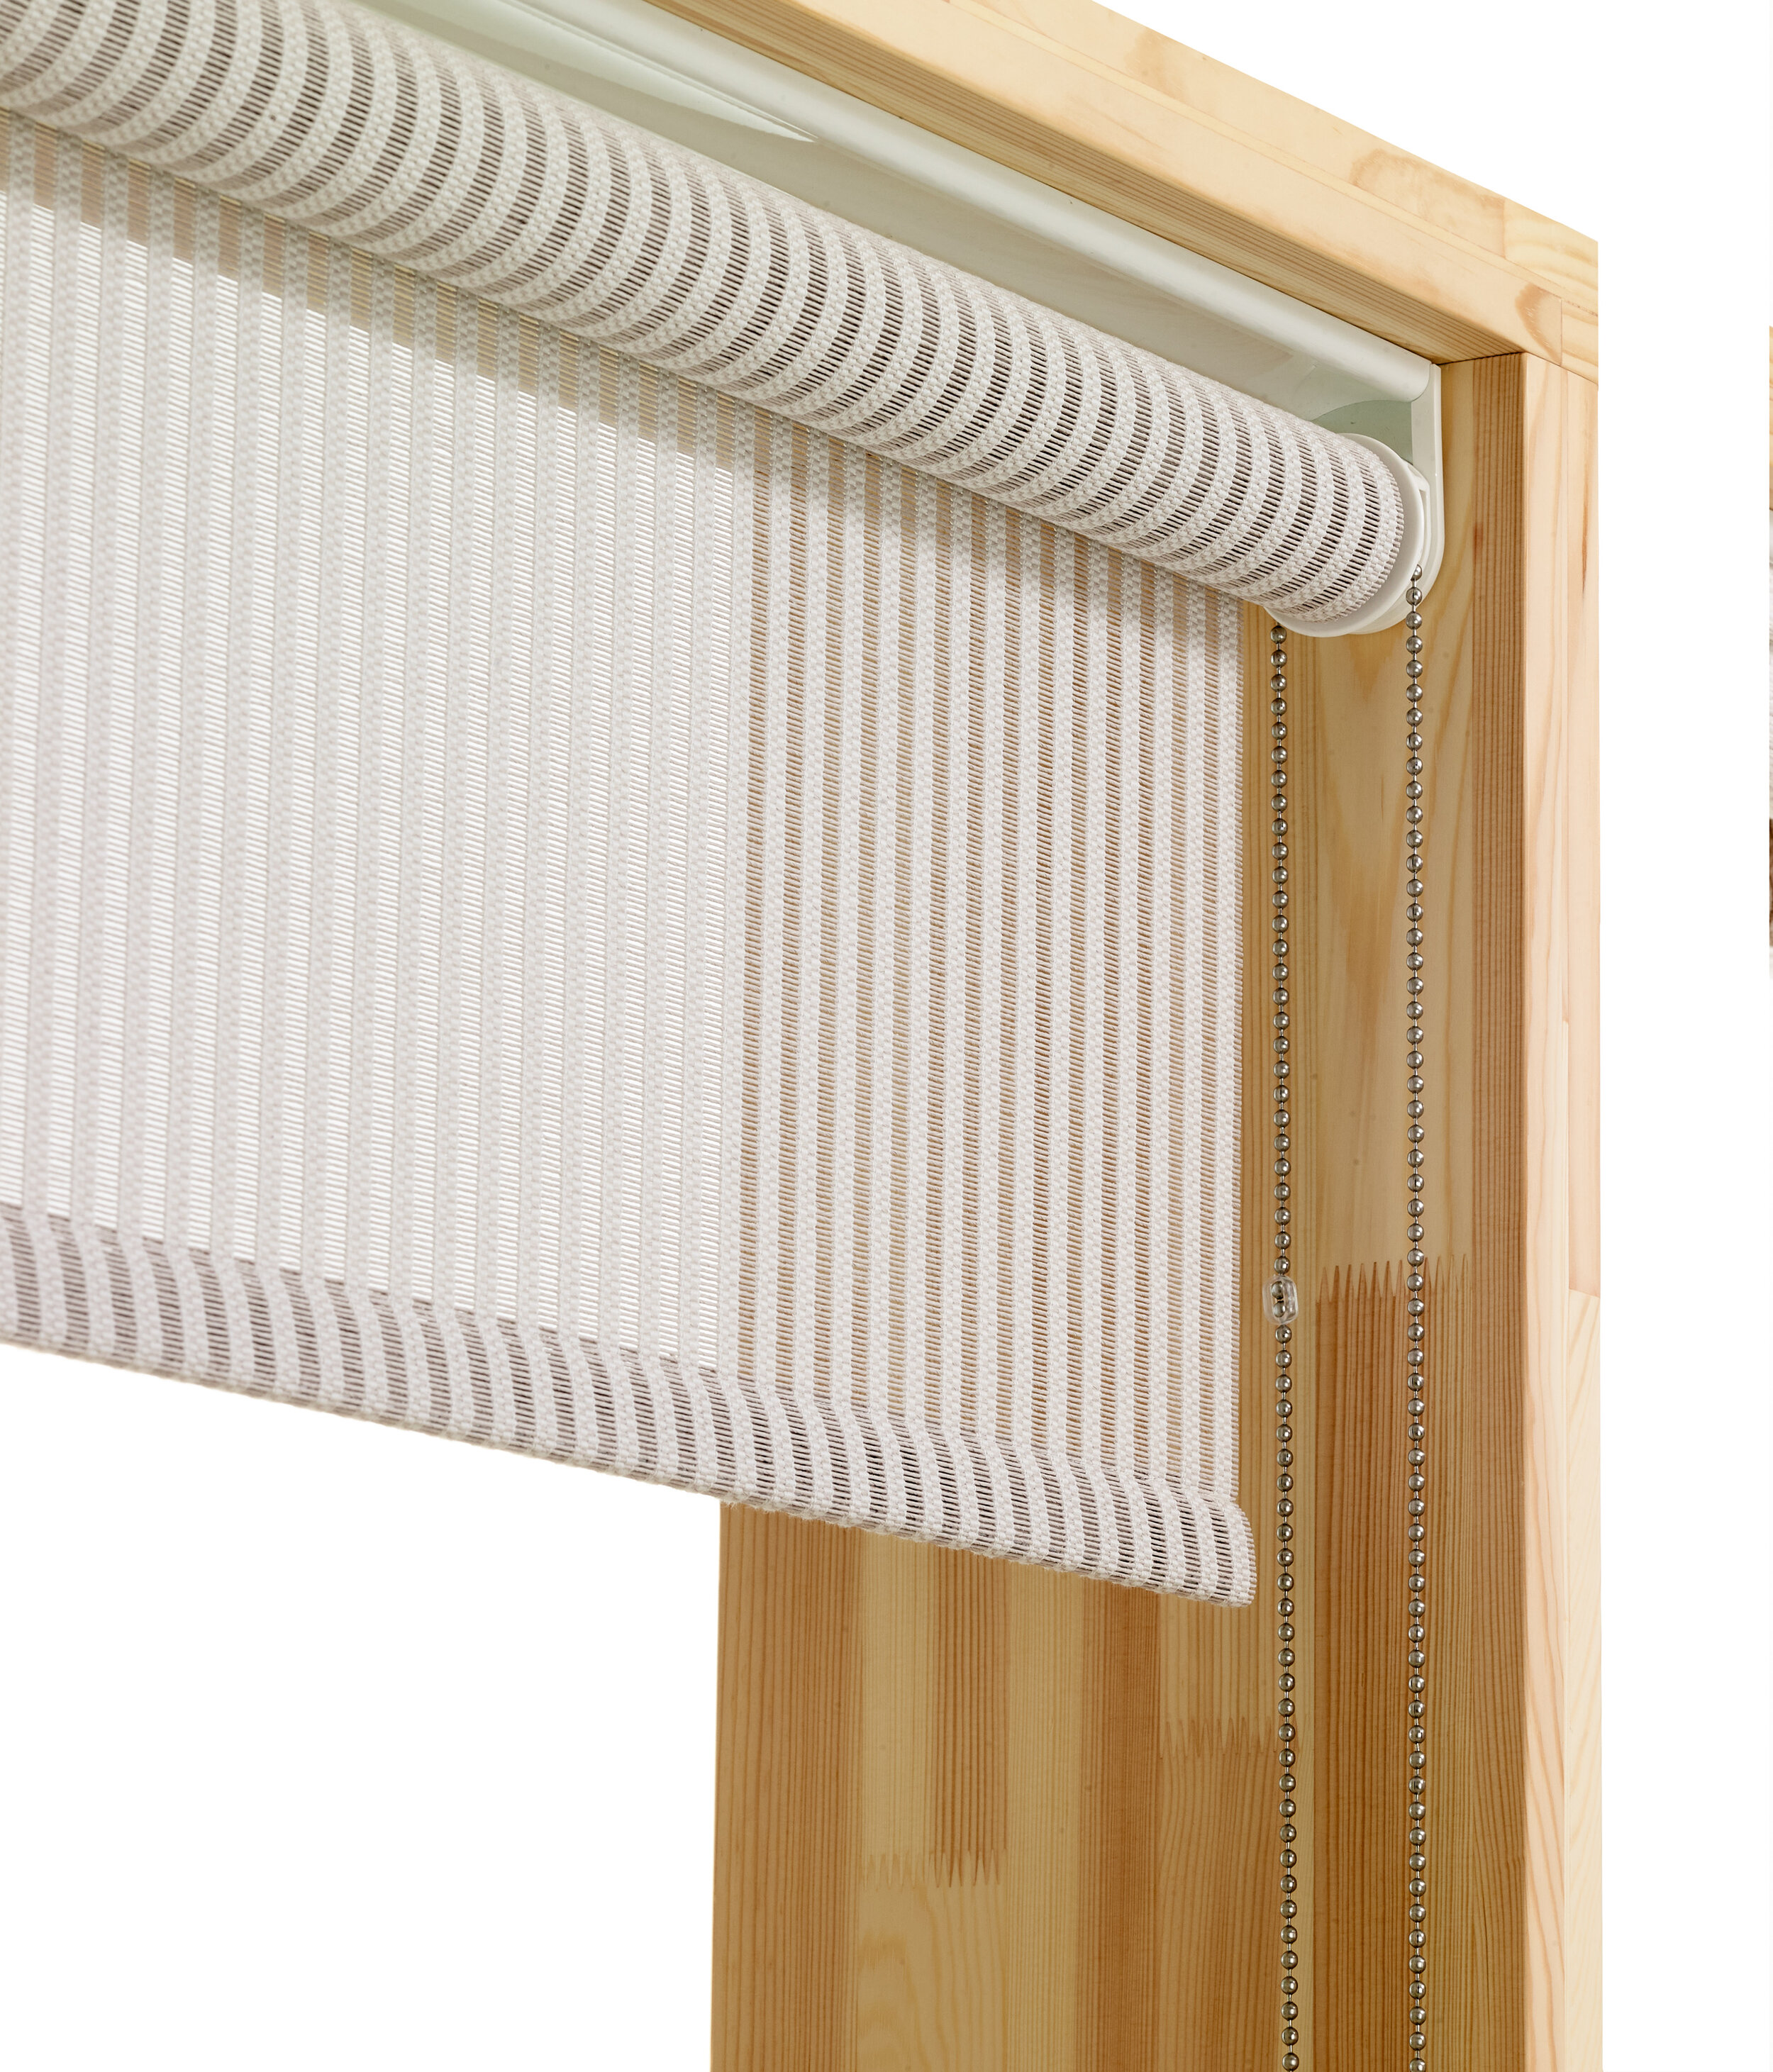 D mechanism_Roller blind with chain operated_back winding_Vista